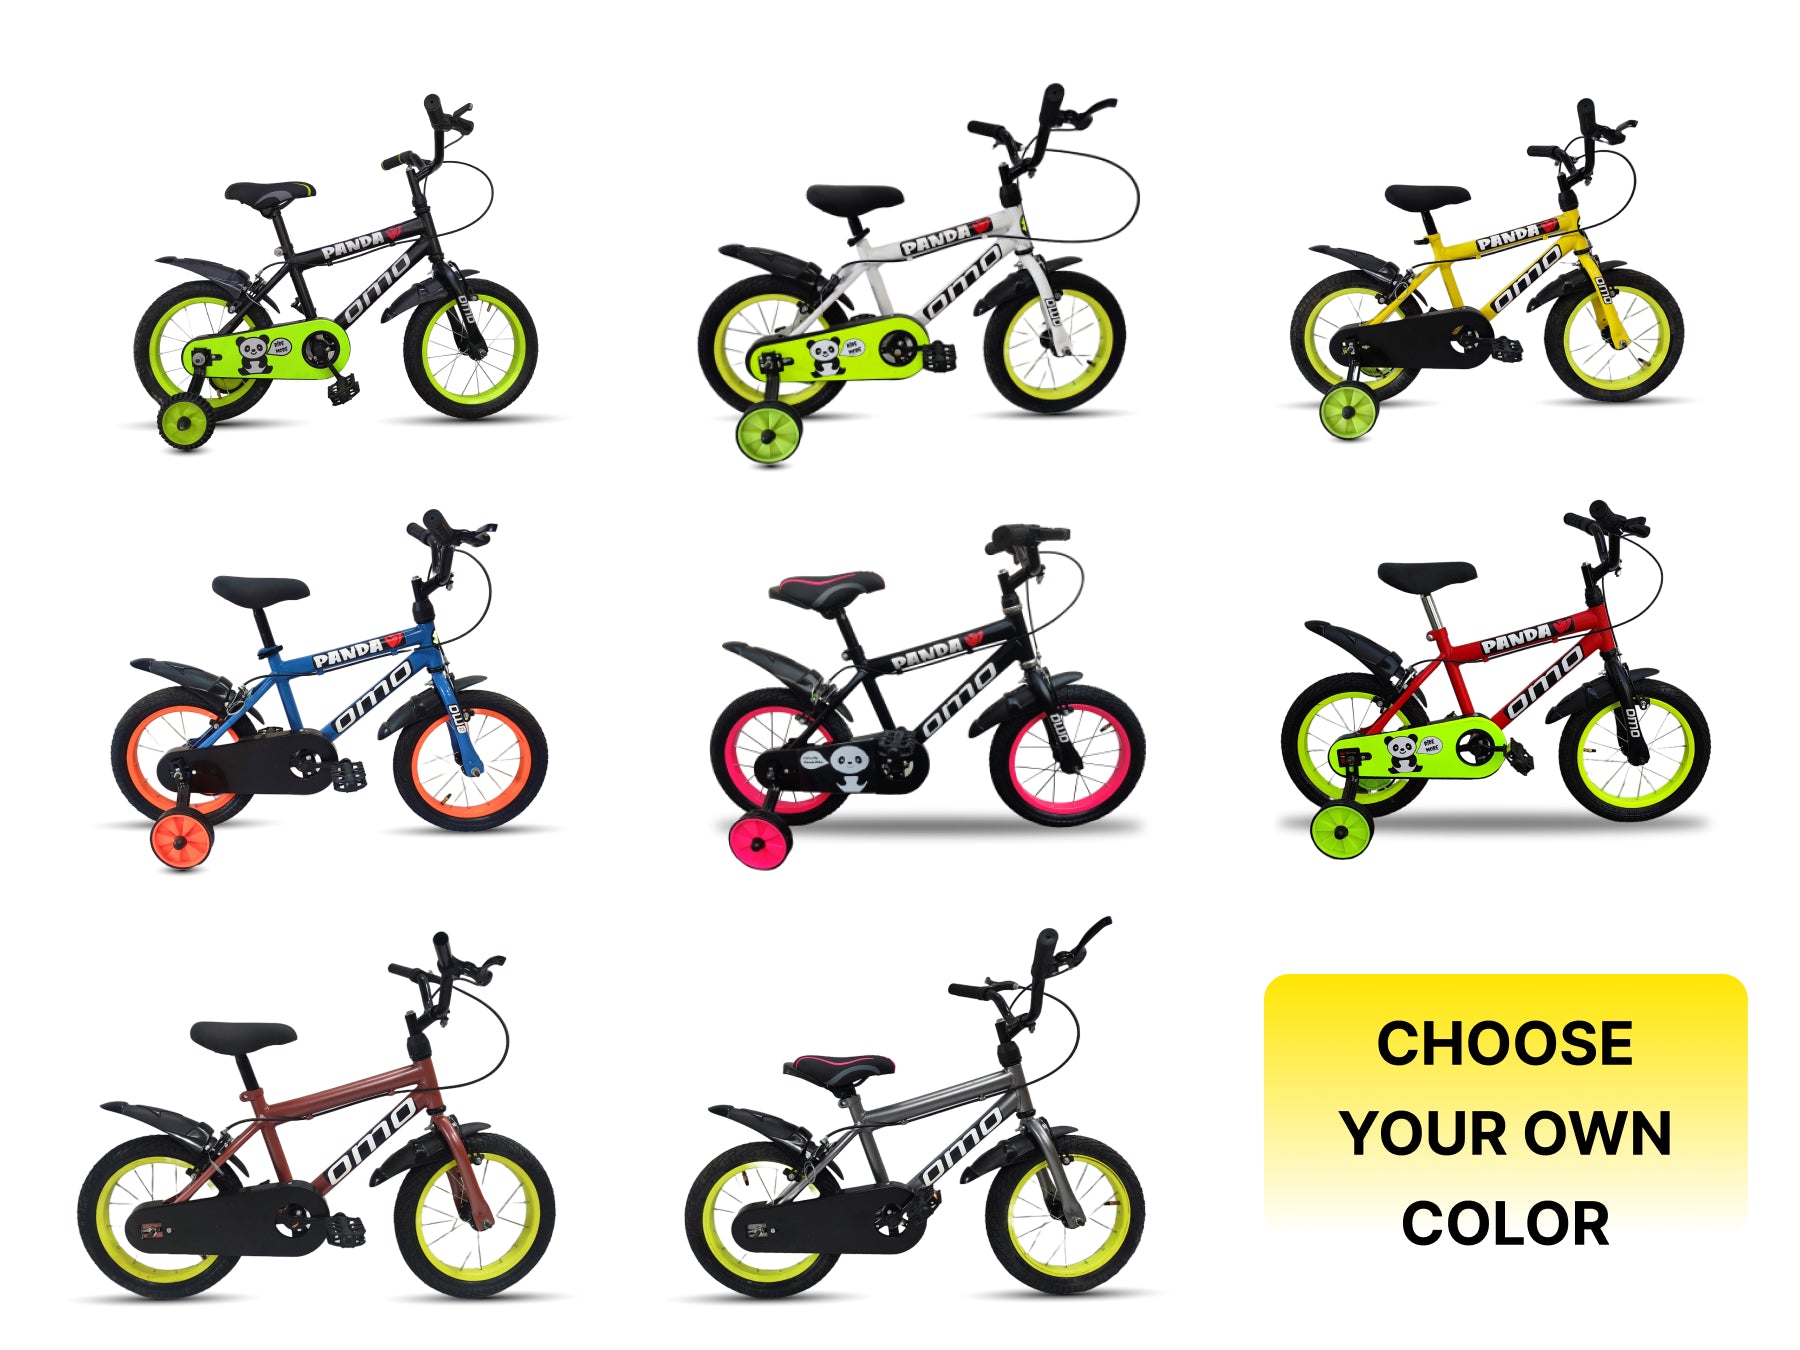 Get custom paint color of choice on your kids omo bike panda 20T in Rs 999 first time online in india